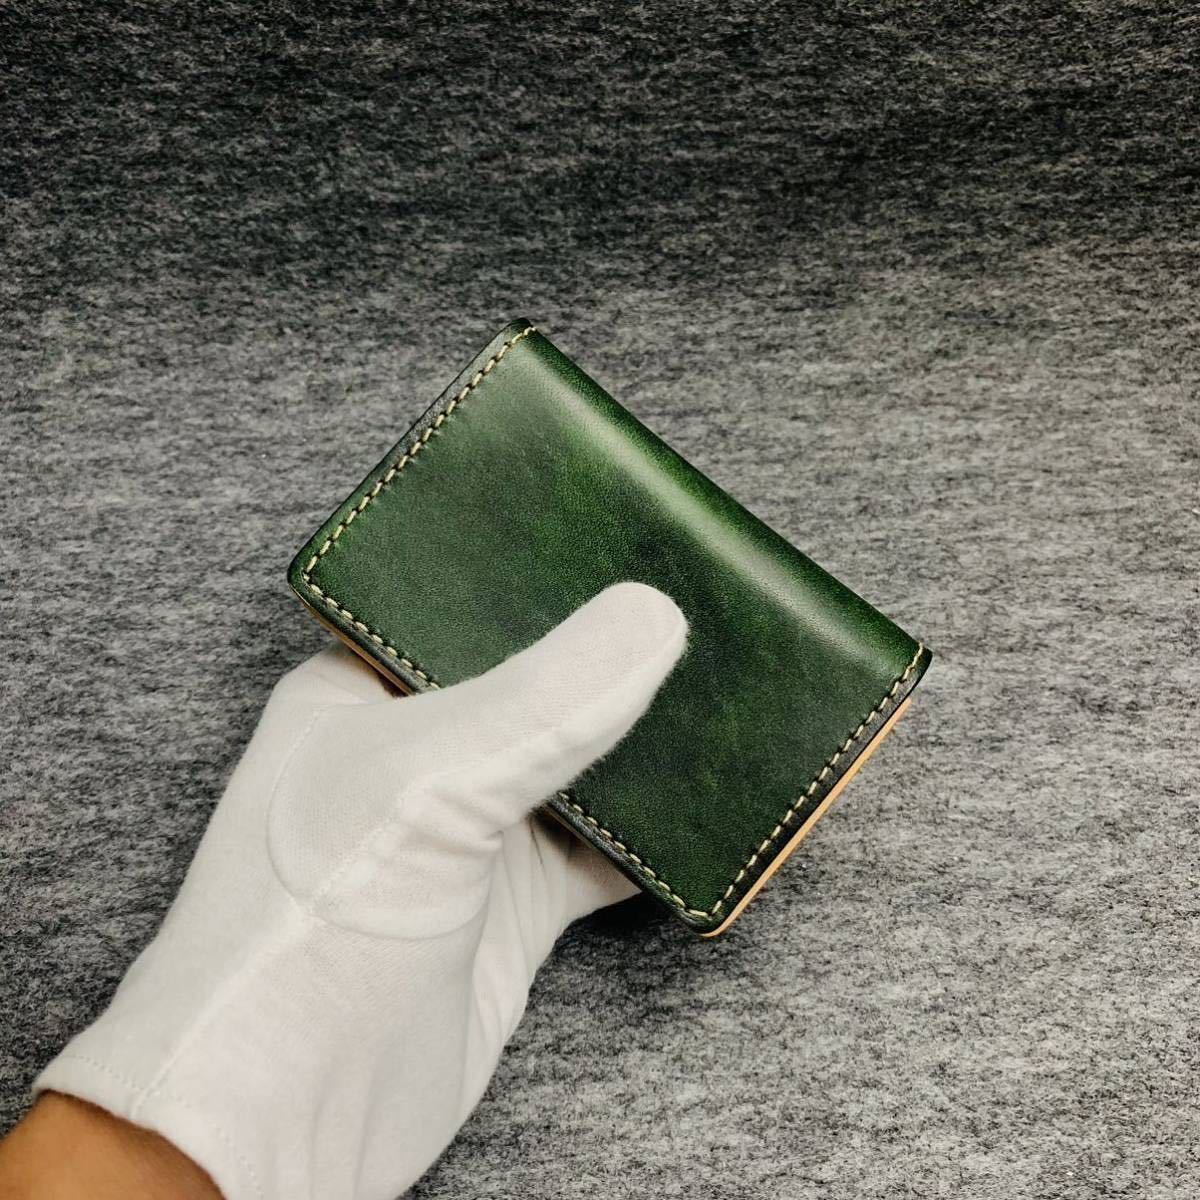  green [ green ] men's card-case card inserting ticket holder cow leather original leather card-case men's purse cow leather business 1 jpy free shipping Advan leather 